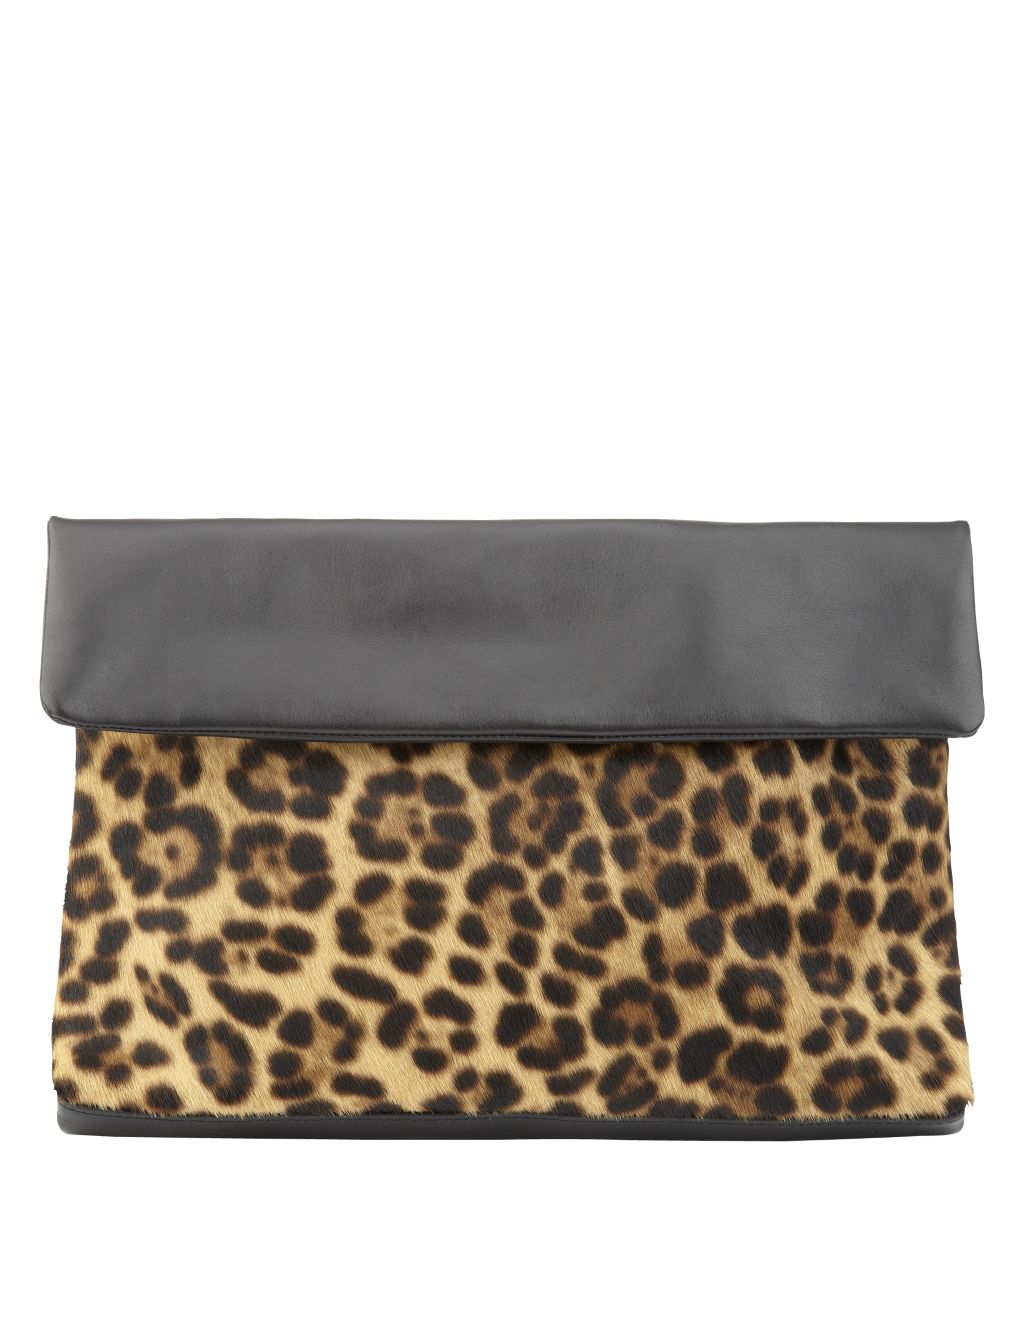 Leather Slouch Clutch Bag 1 of 7